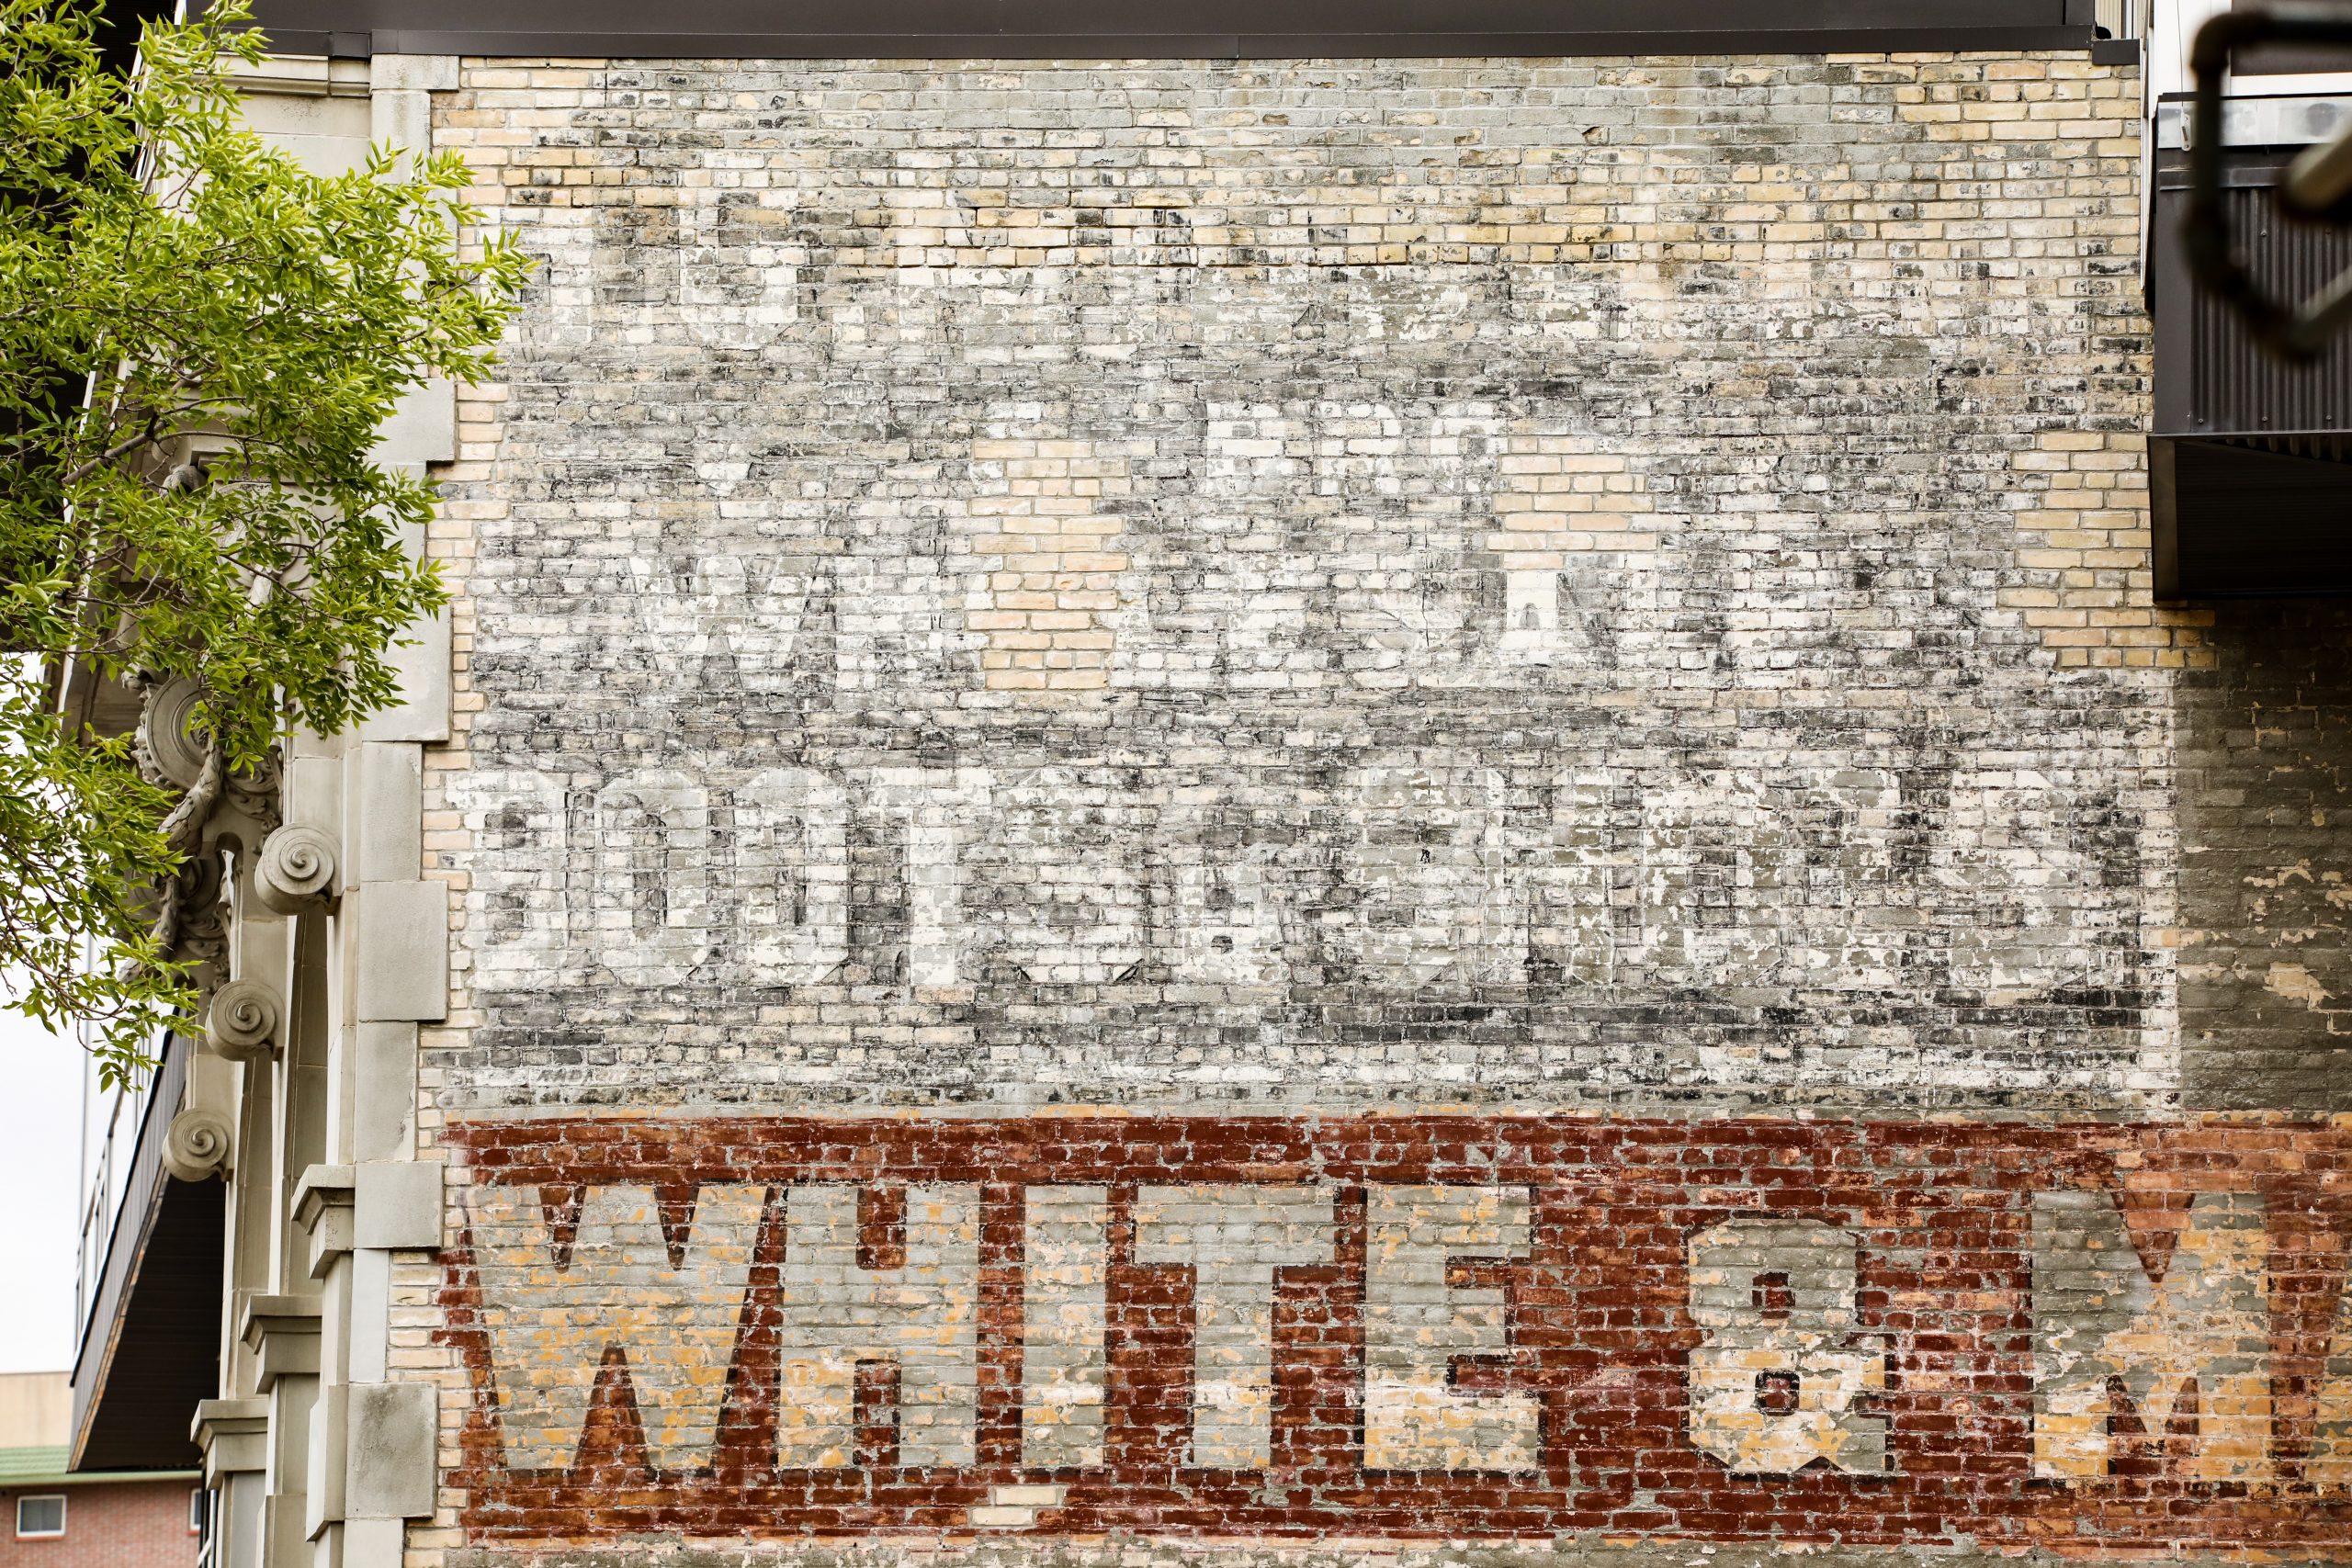 Ghost Sign of White and Mannahan at 500 Main Street.